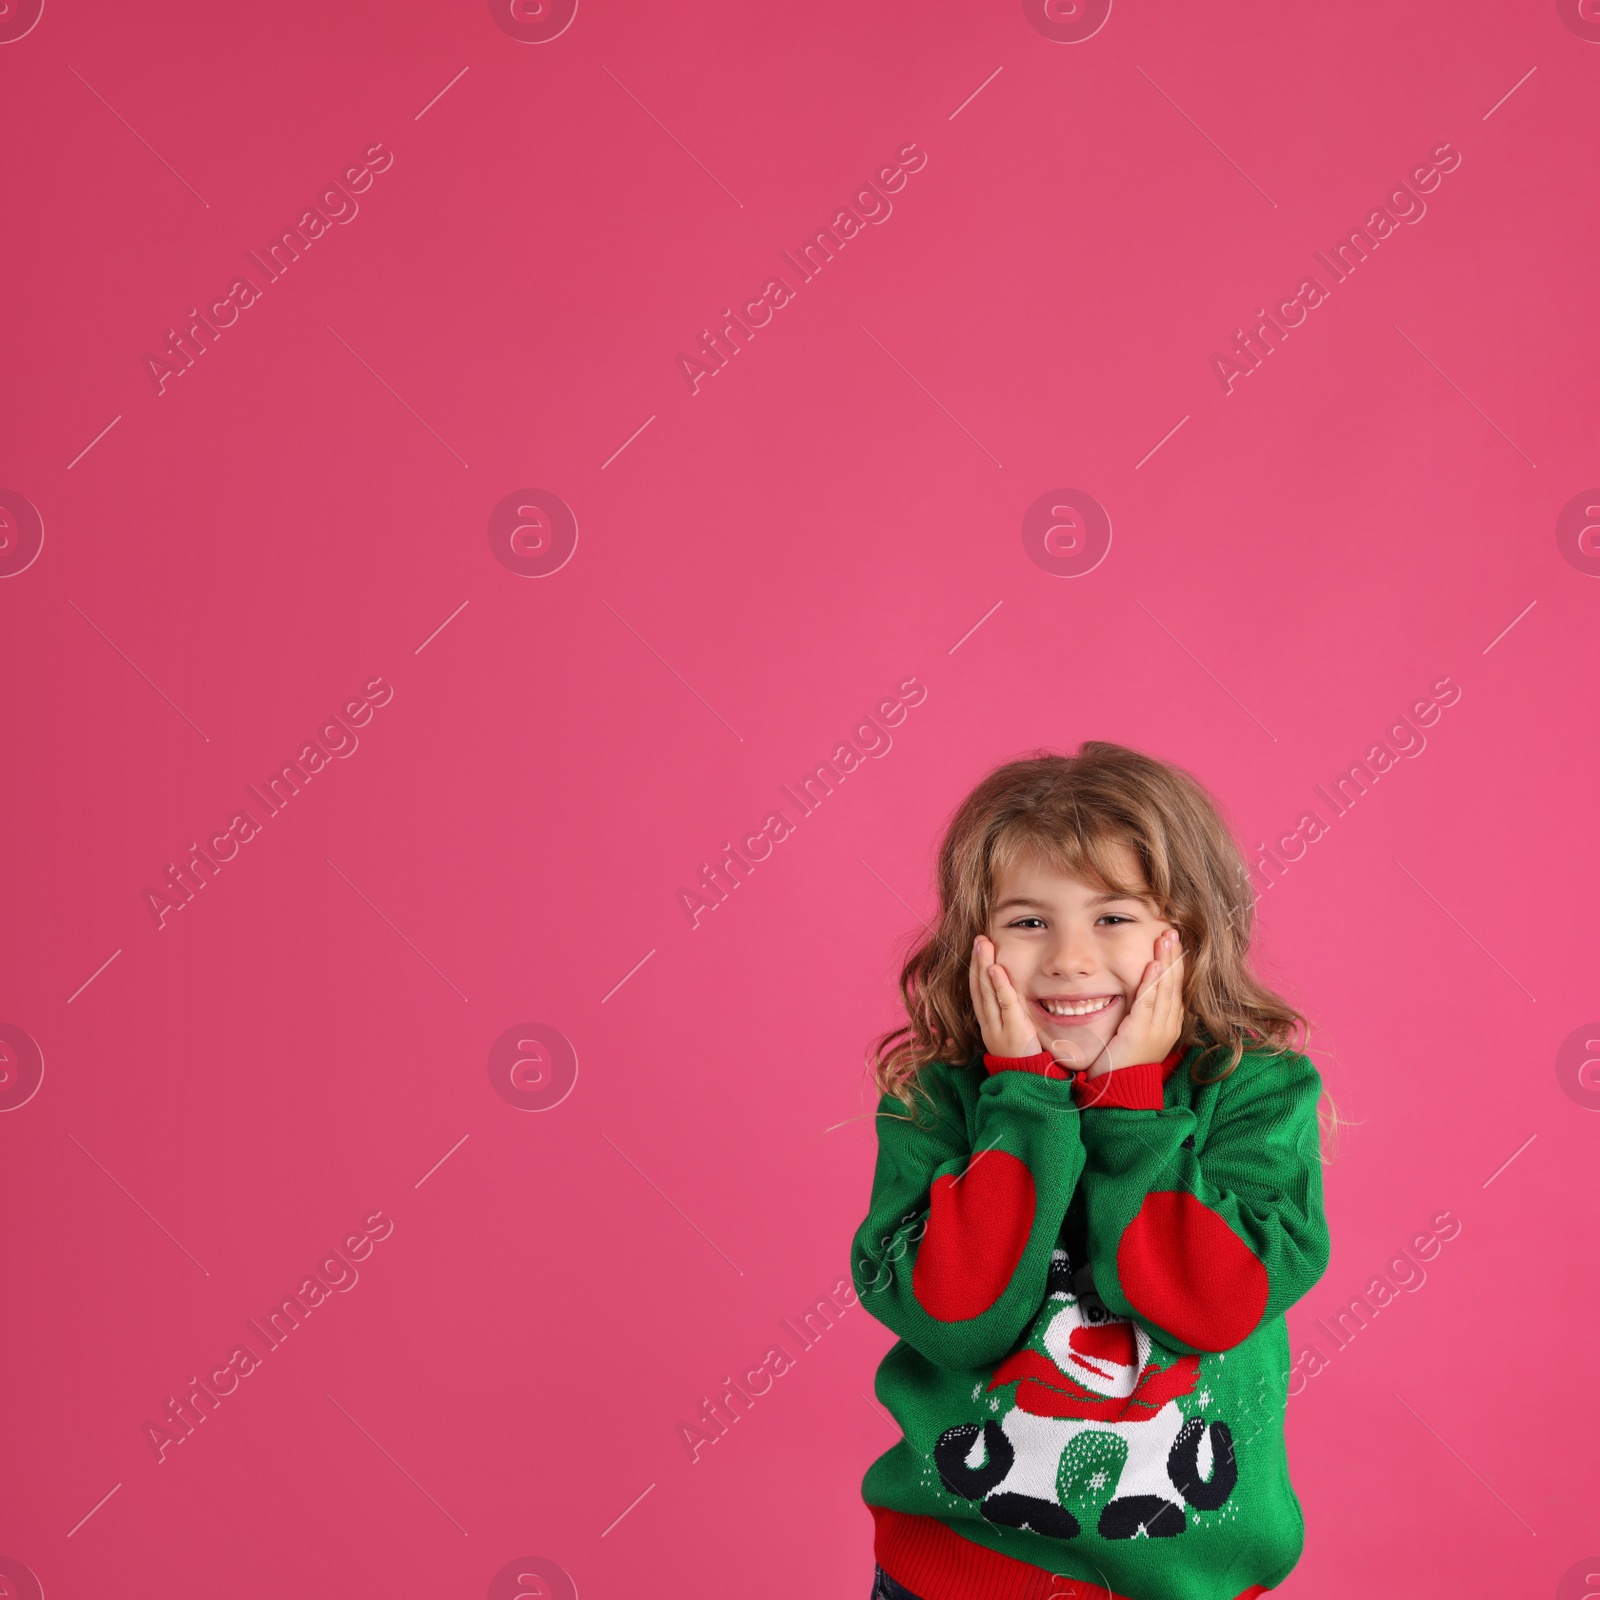 Photo of Cute little girl in green Christmas sweater smiling against pink background. Space for text